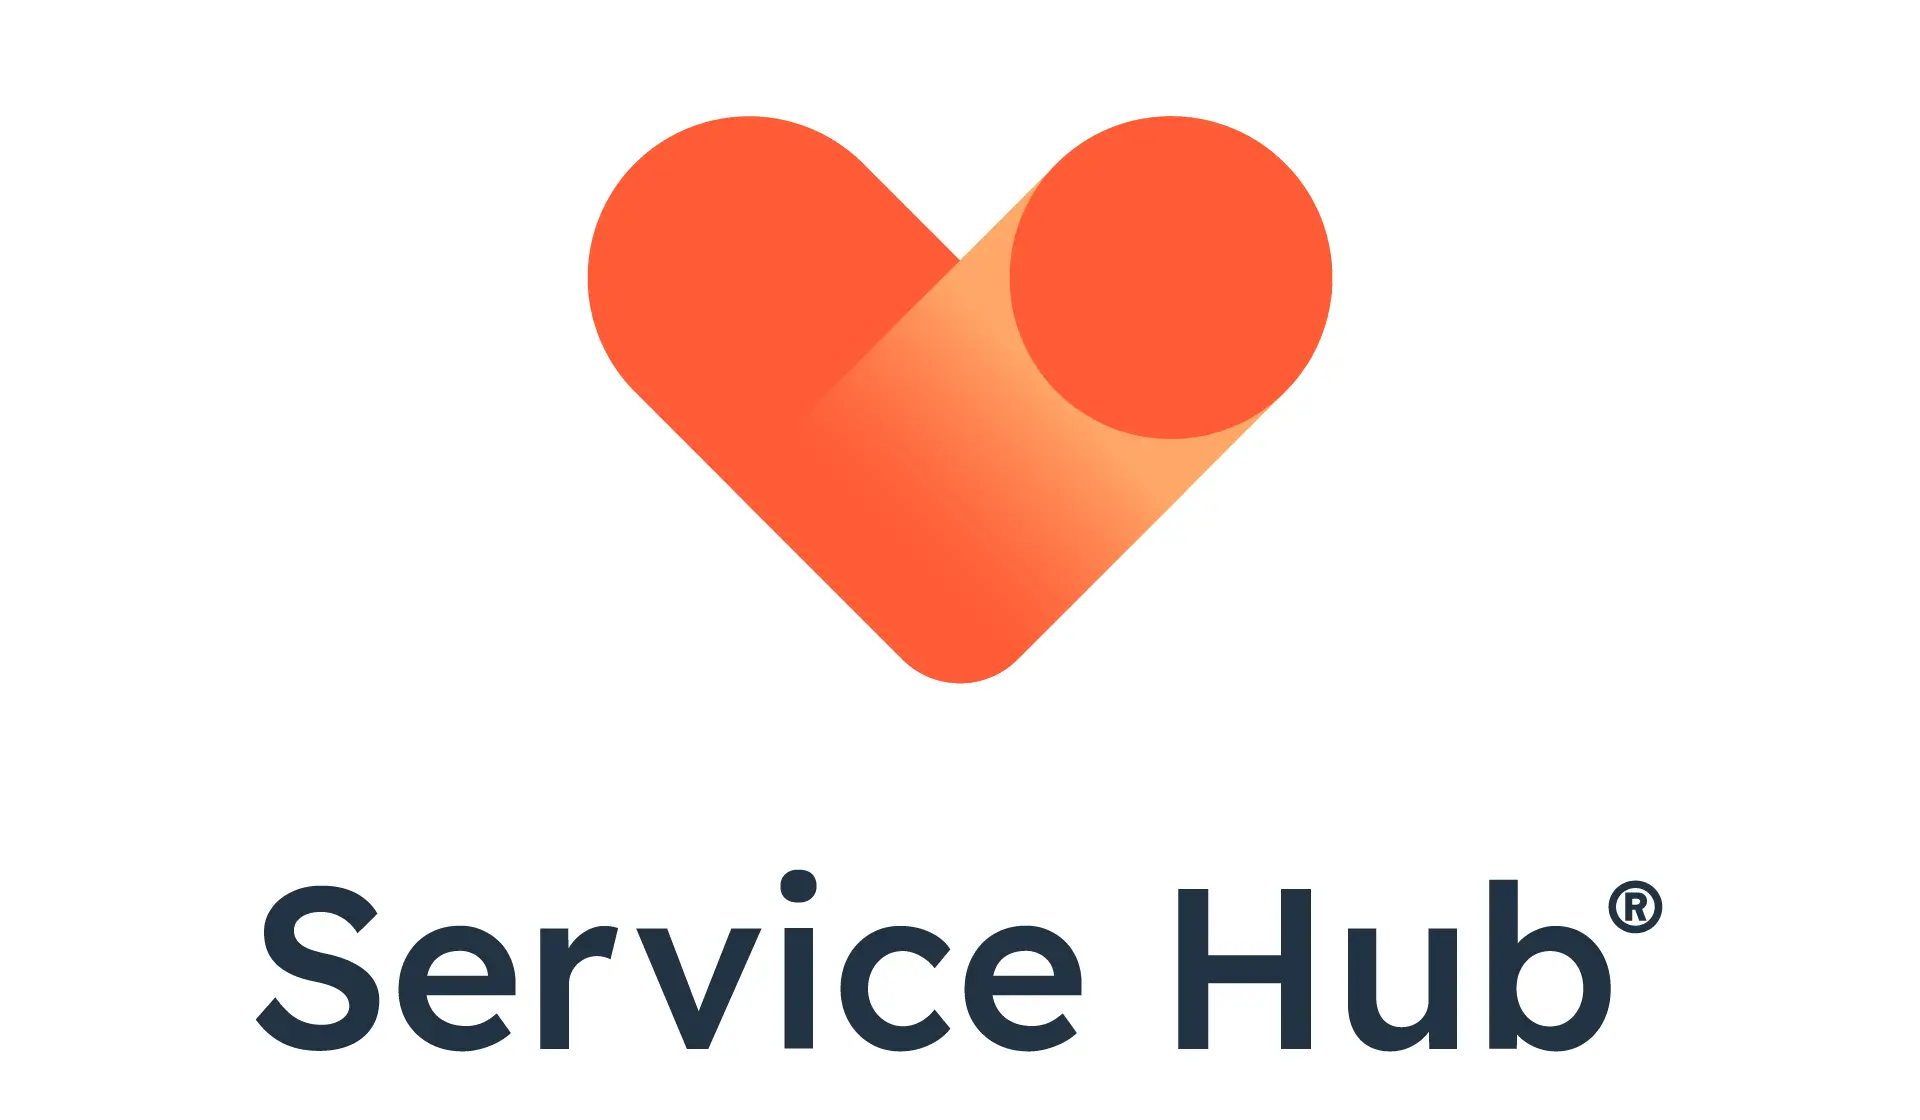 What is the new HubSpot Service Hub 2.0